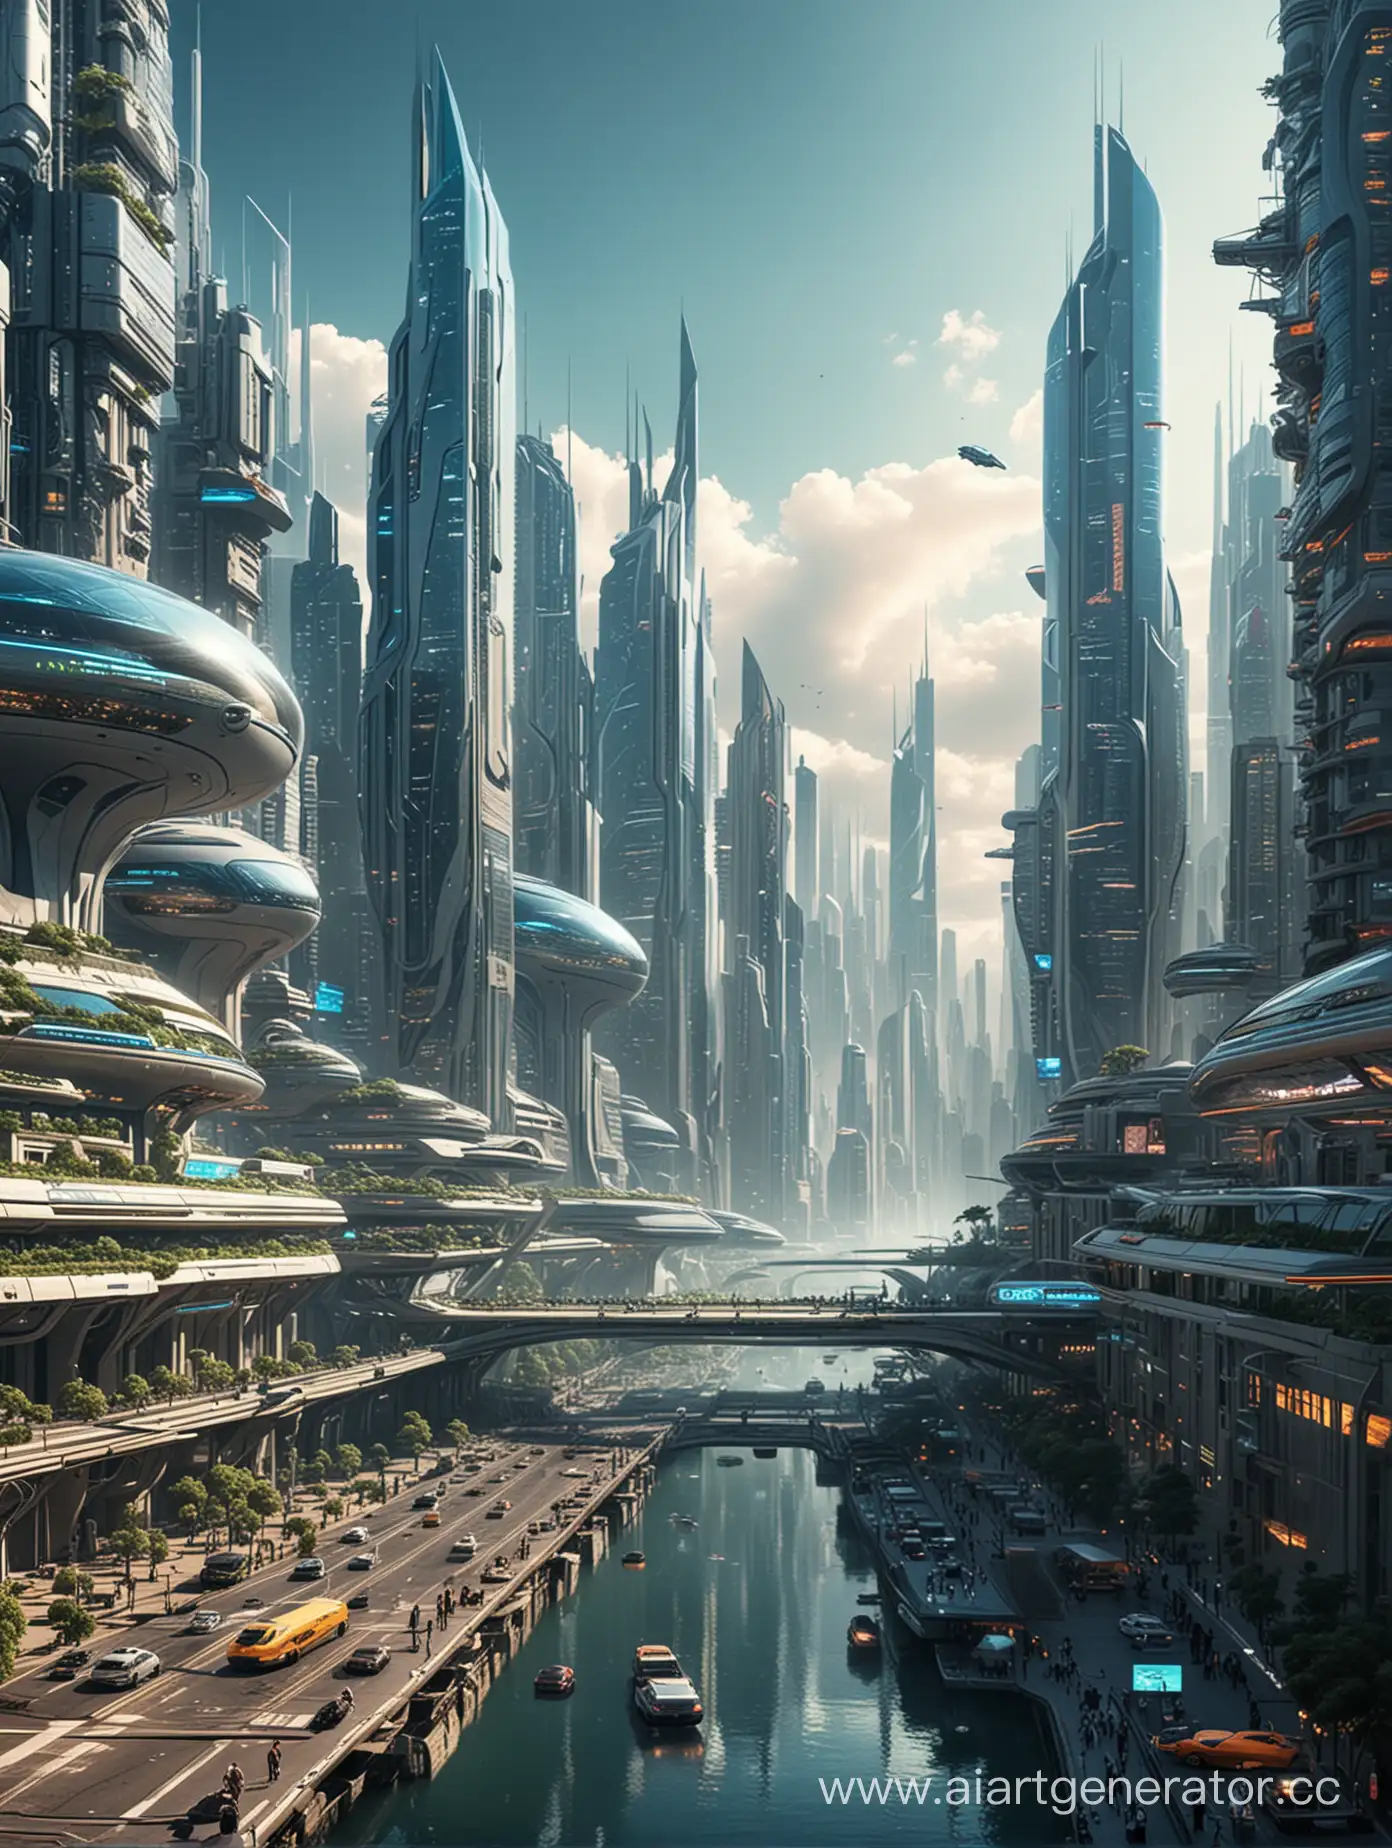 Futuristic-Metropolis-with-Advanced-Technology-and-Skyline-Innovations